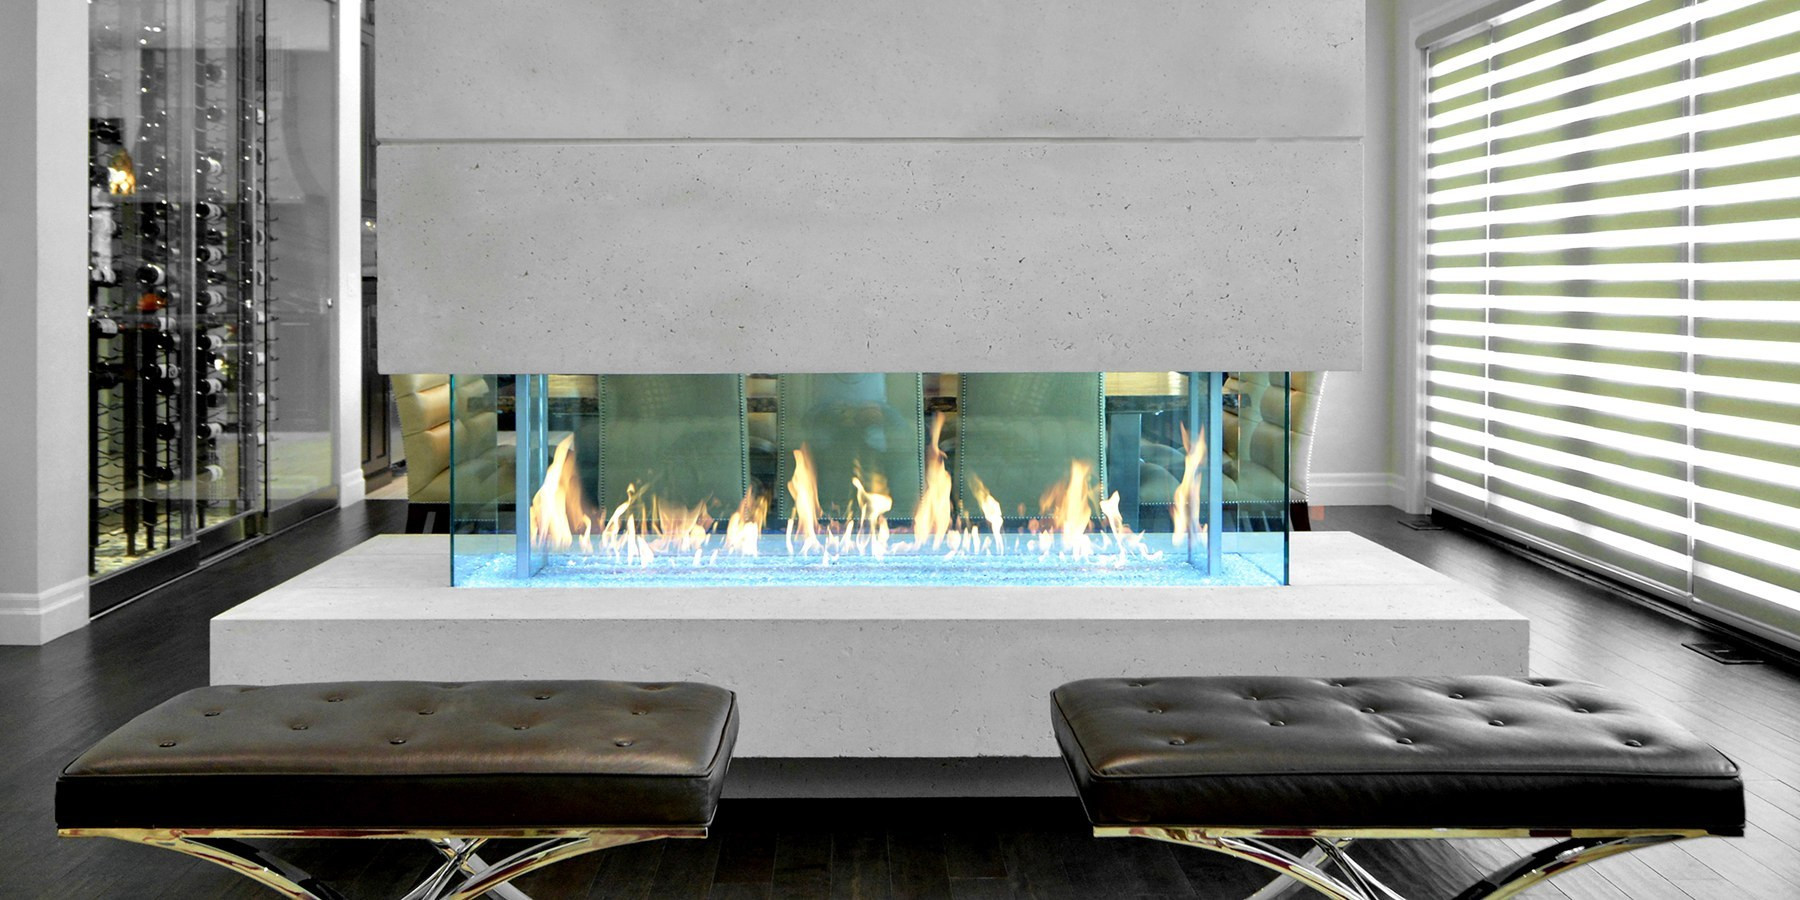 Nyc Fireplaces &amp; Outdoor Kitchens
 Home NYC Fireplaces & Outdoor Kitchens